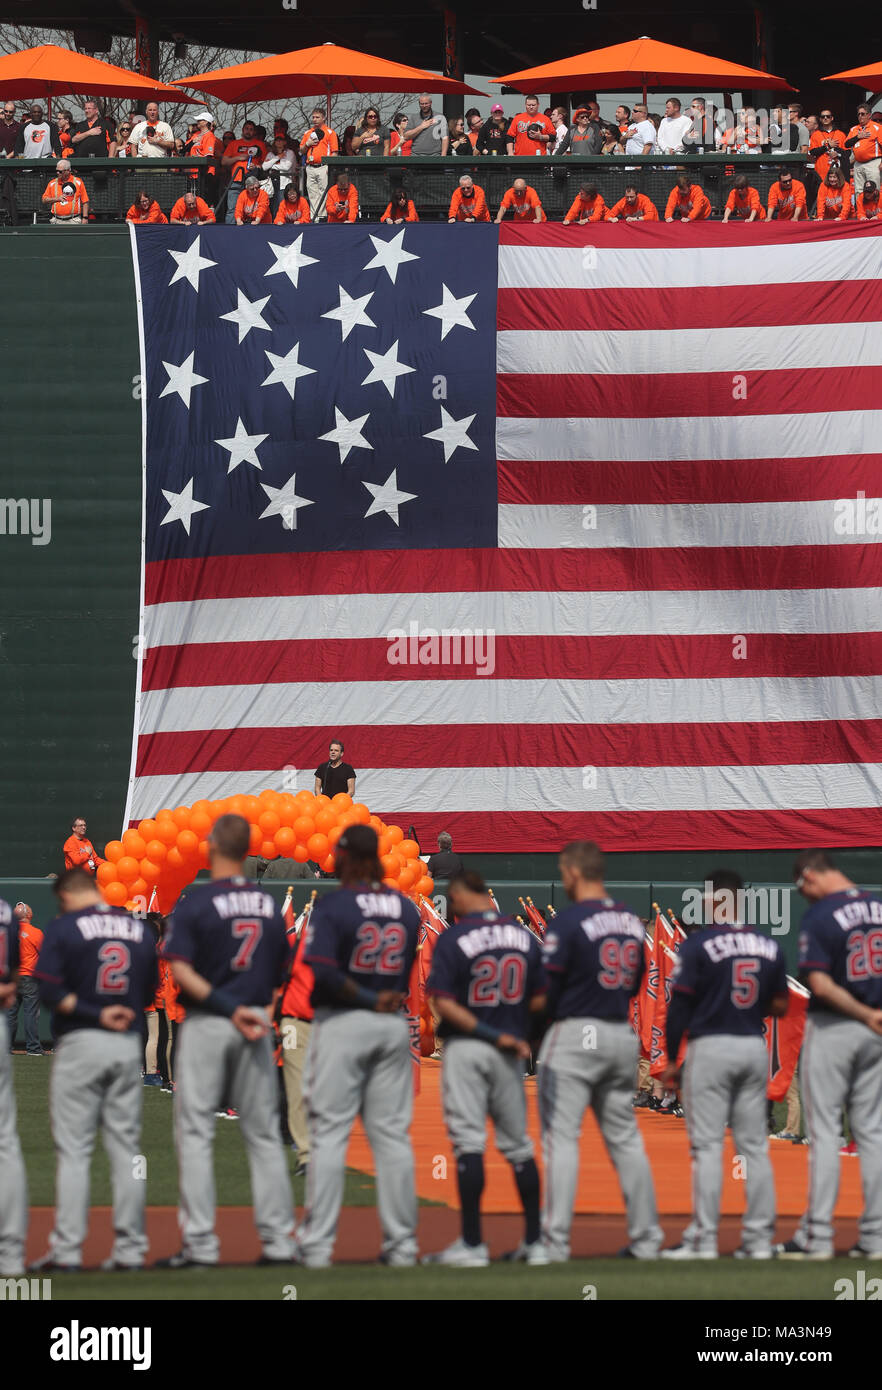 Richard Troxell of Thurmont, MD performs the ''The Star-Spangled Banner'' before the opening day game between the Minnesota Twins and Baltimore Orioles at Oriole Park at Camden Yards in Baltimore, MD on March 29, 2018. Baltimore would go on to win 3-2 in extra innings. Photo/ Mike Buscher/Cal Sport Media Stock Photo